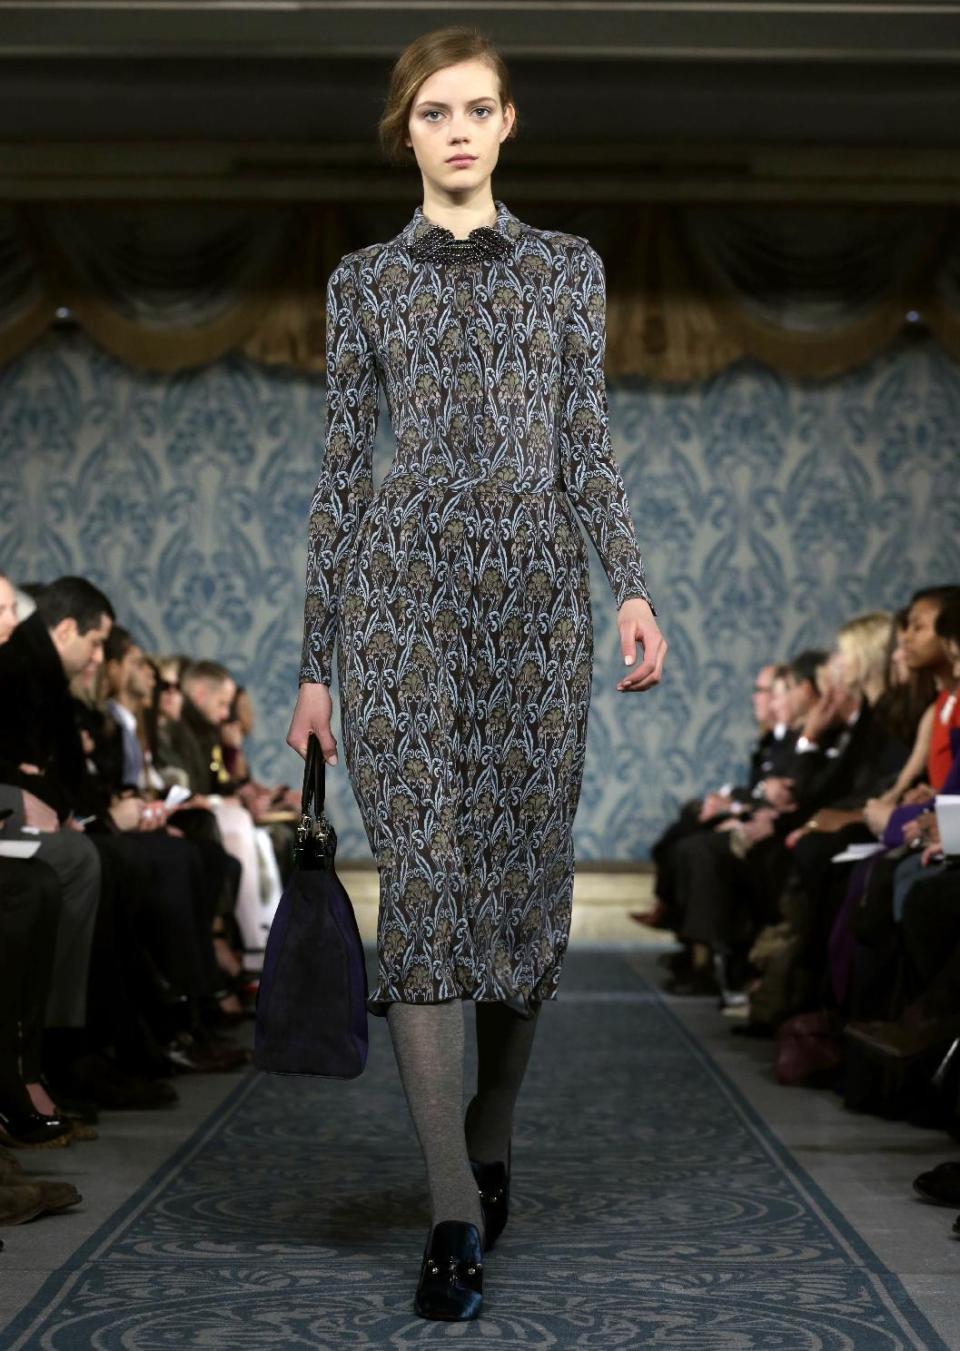 The Tory Burch Fall 2013 collection is modeled during Fashion Week in New York on Tuesday, Feb. 12, 2013. (AP Photo/Richard Drew)